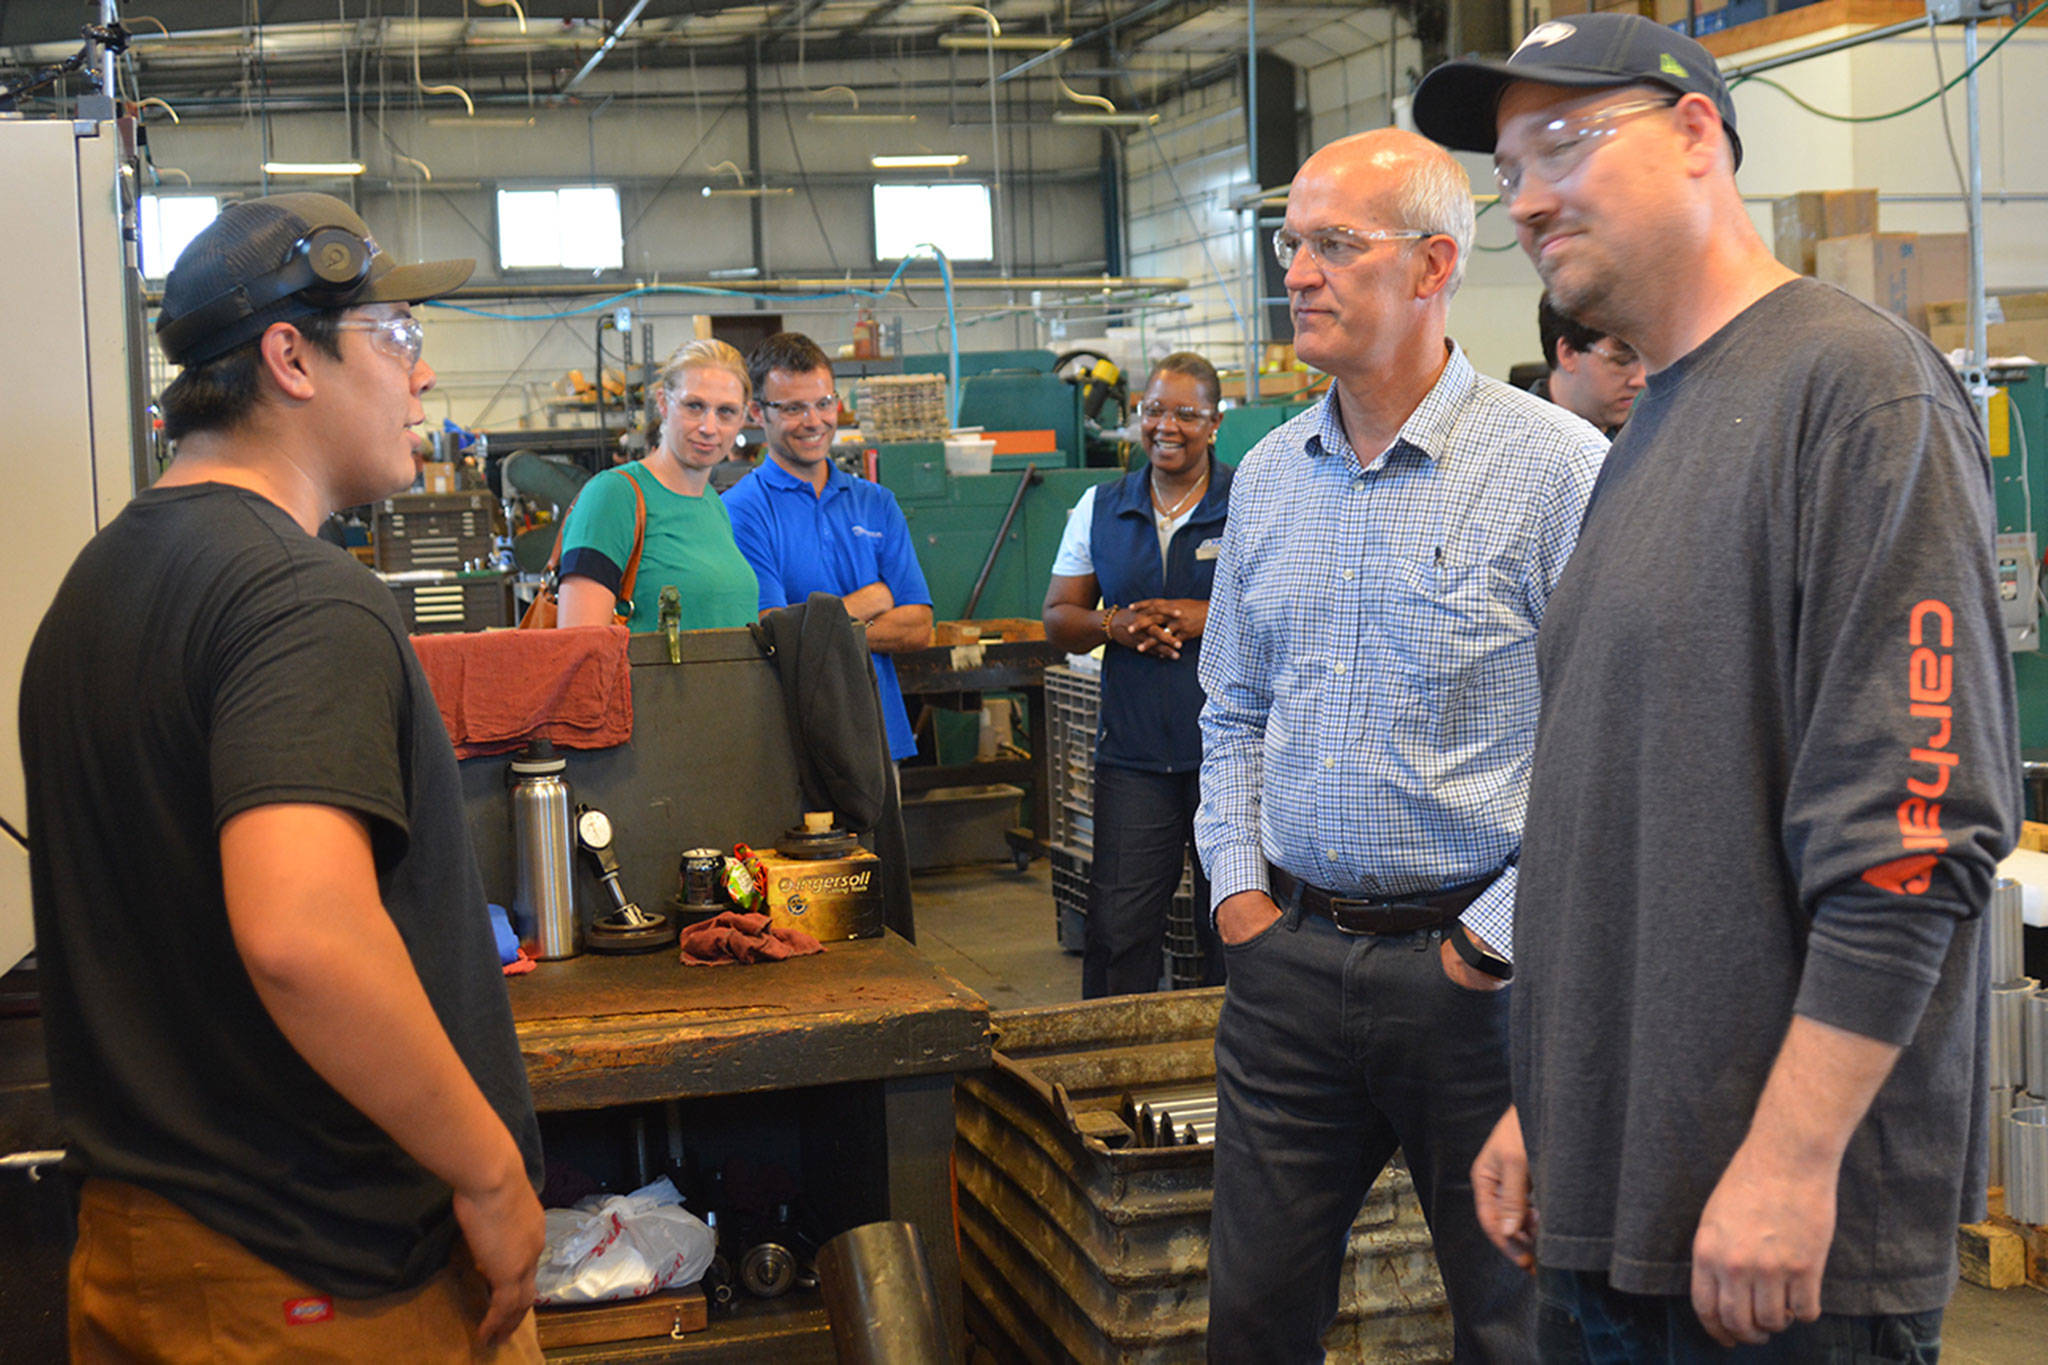 Apprenticeship program helps high schoolers learn vital skills for high-paying jobs (slide show)